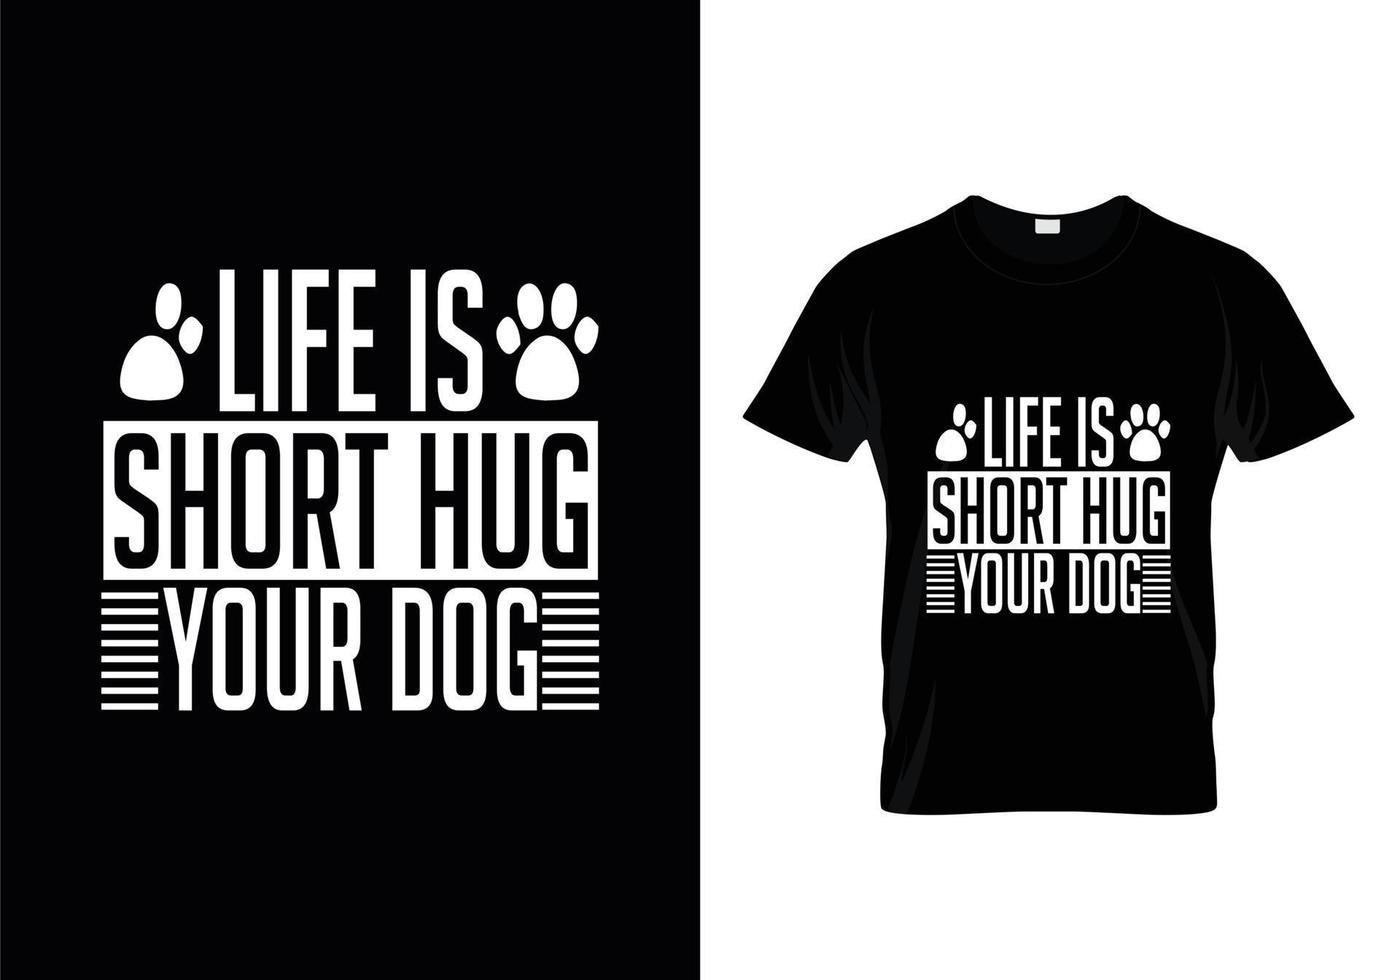 Dog t shirt design. Paw design for dog lovers. Saying - My dog thinks I am great. vector